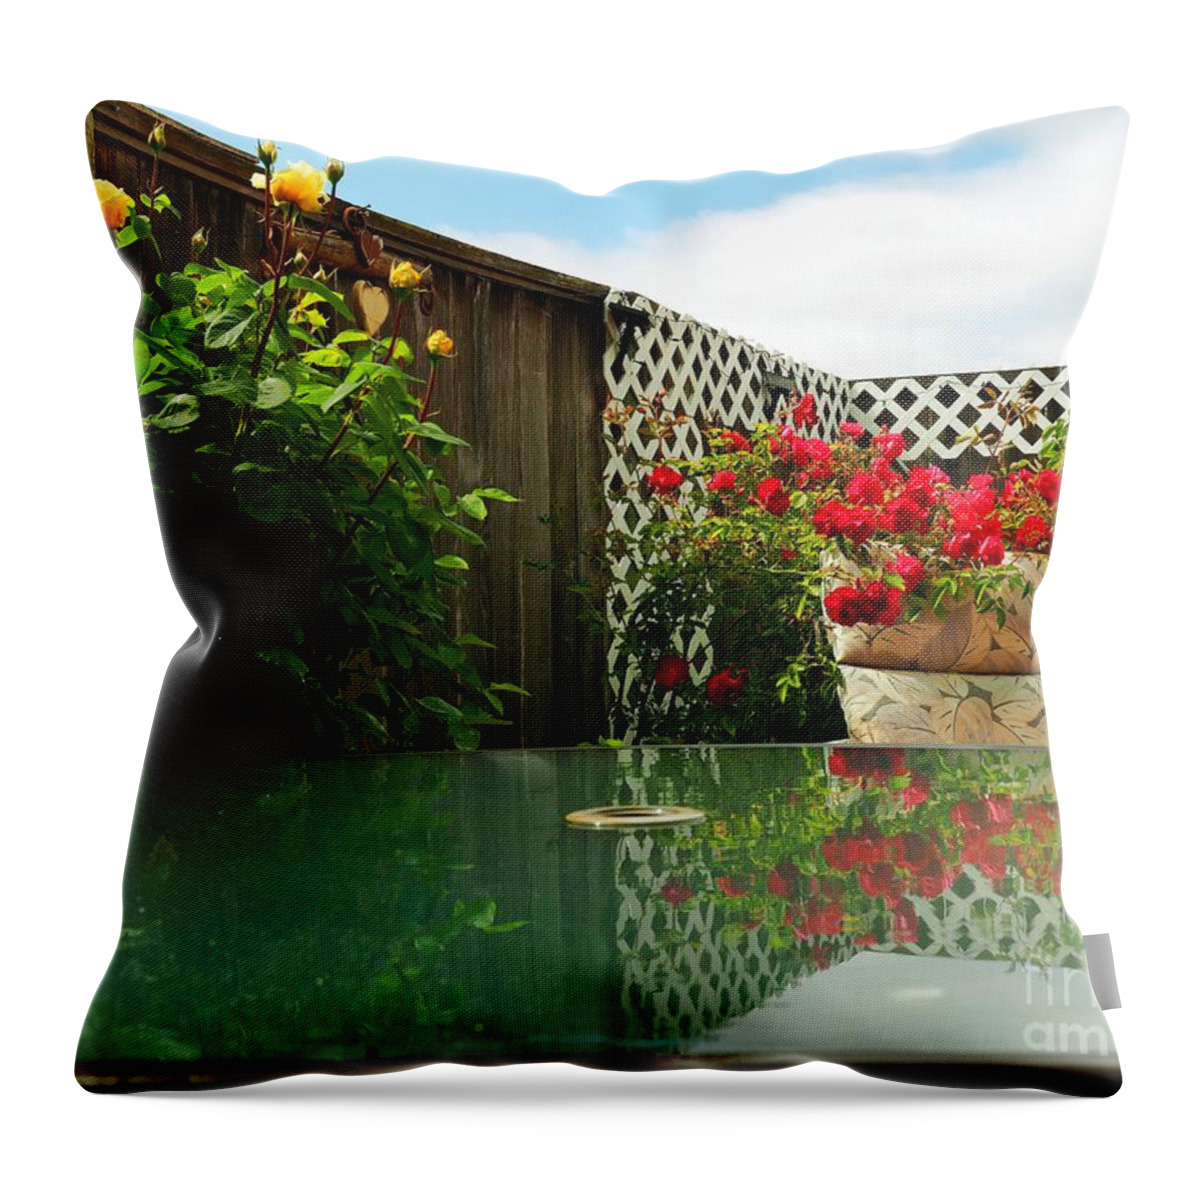 Still Life Throw Pillow featuring the photograph Lighting Exercise by Richard Thomas